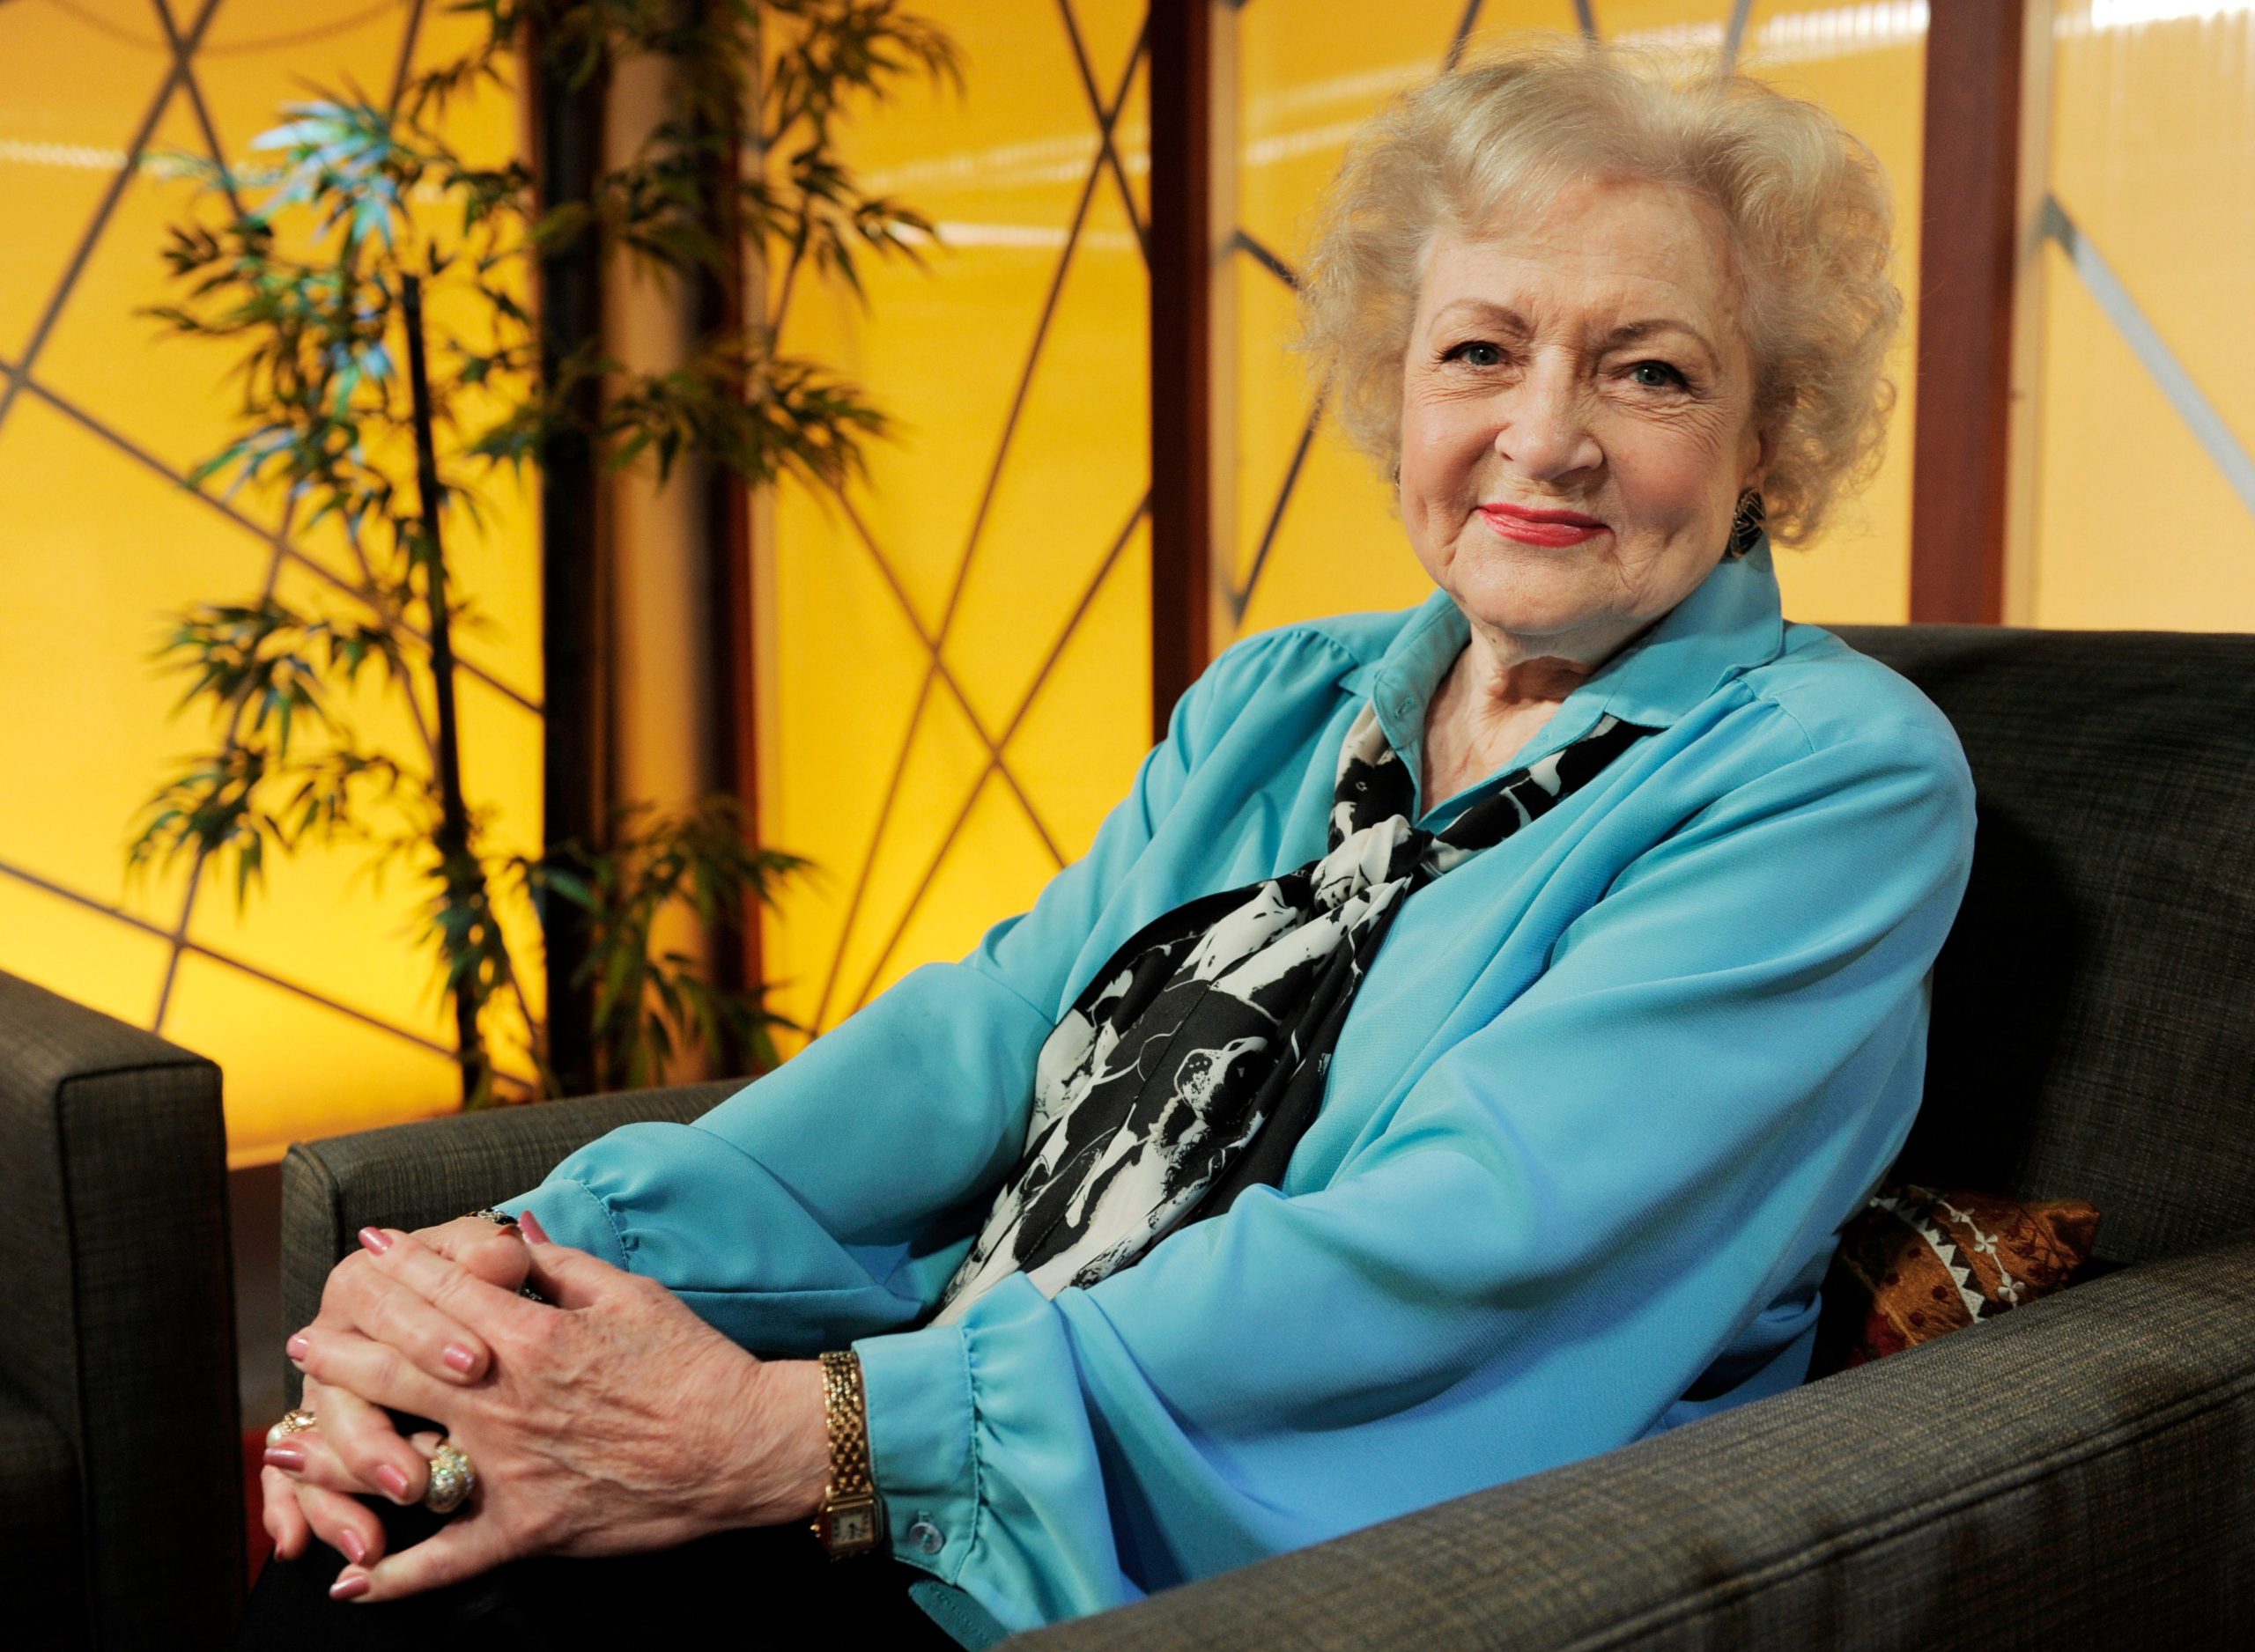 Google celebrates Betty White’s 100th birthday with hidden easter egg – here’s how to find it